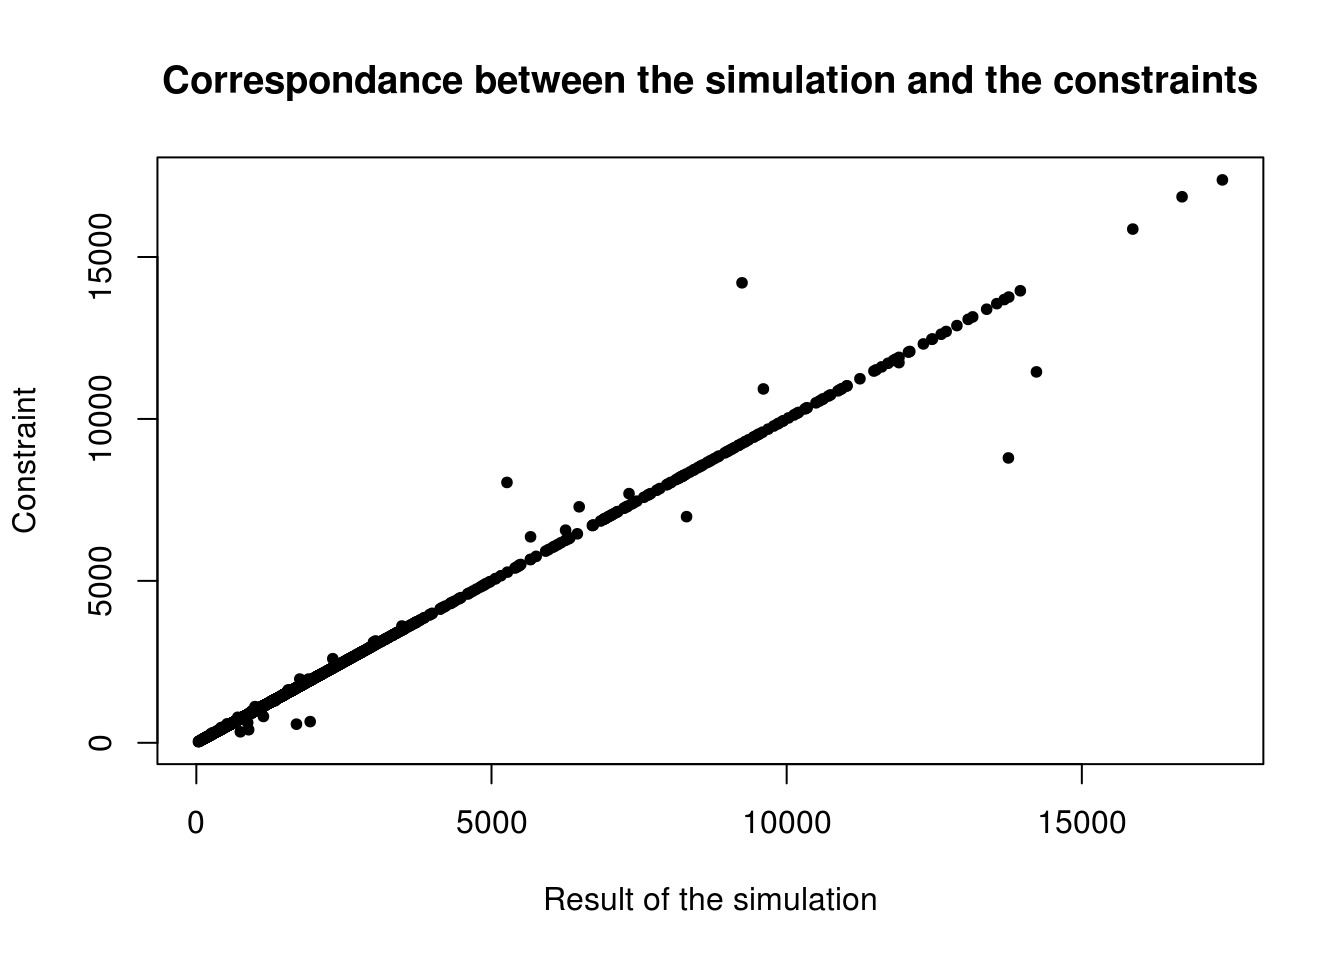 Scatter plot of the relationship between observed cell counts for all categories and all zones from the census (x axis) and the simulated cell counts after IPF (y axis).